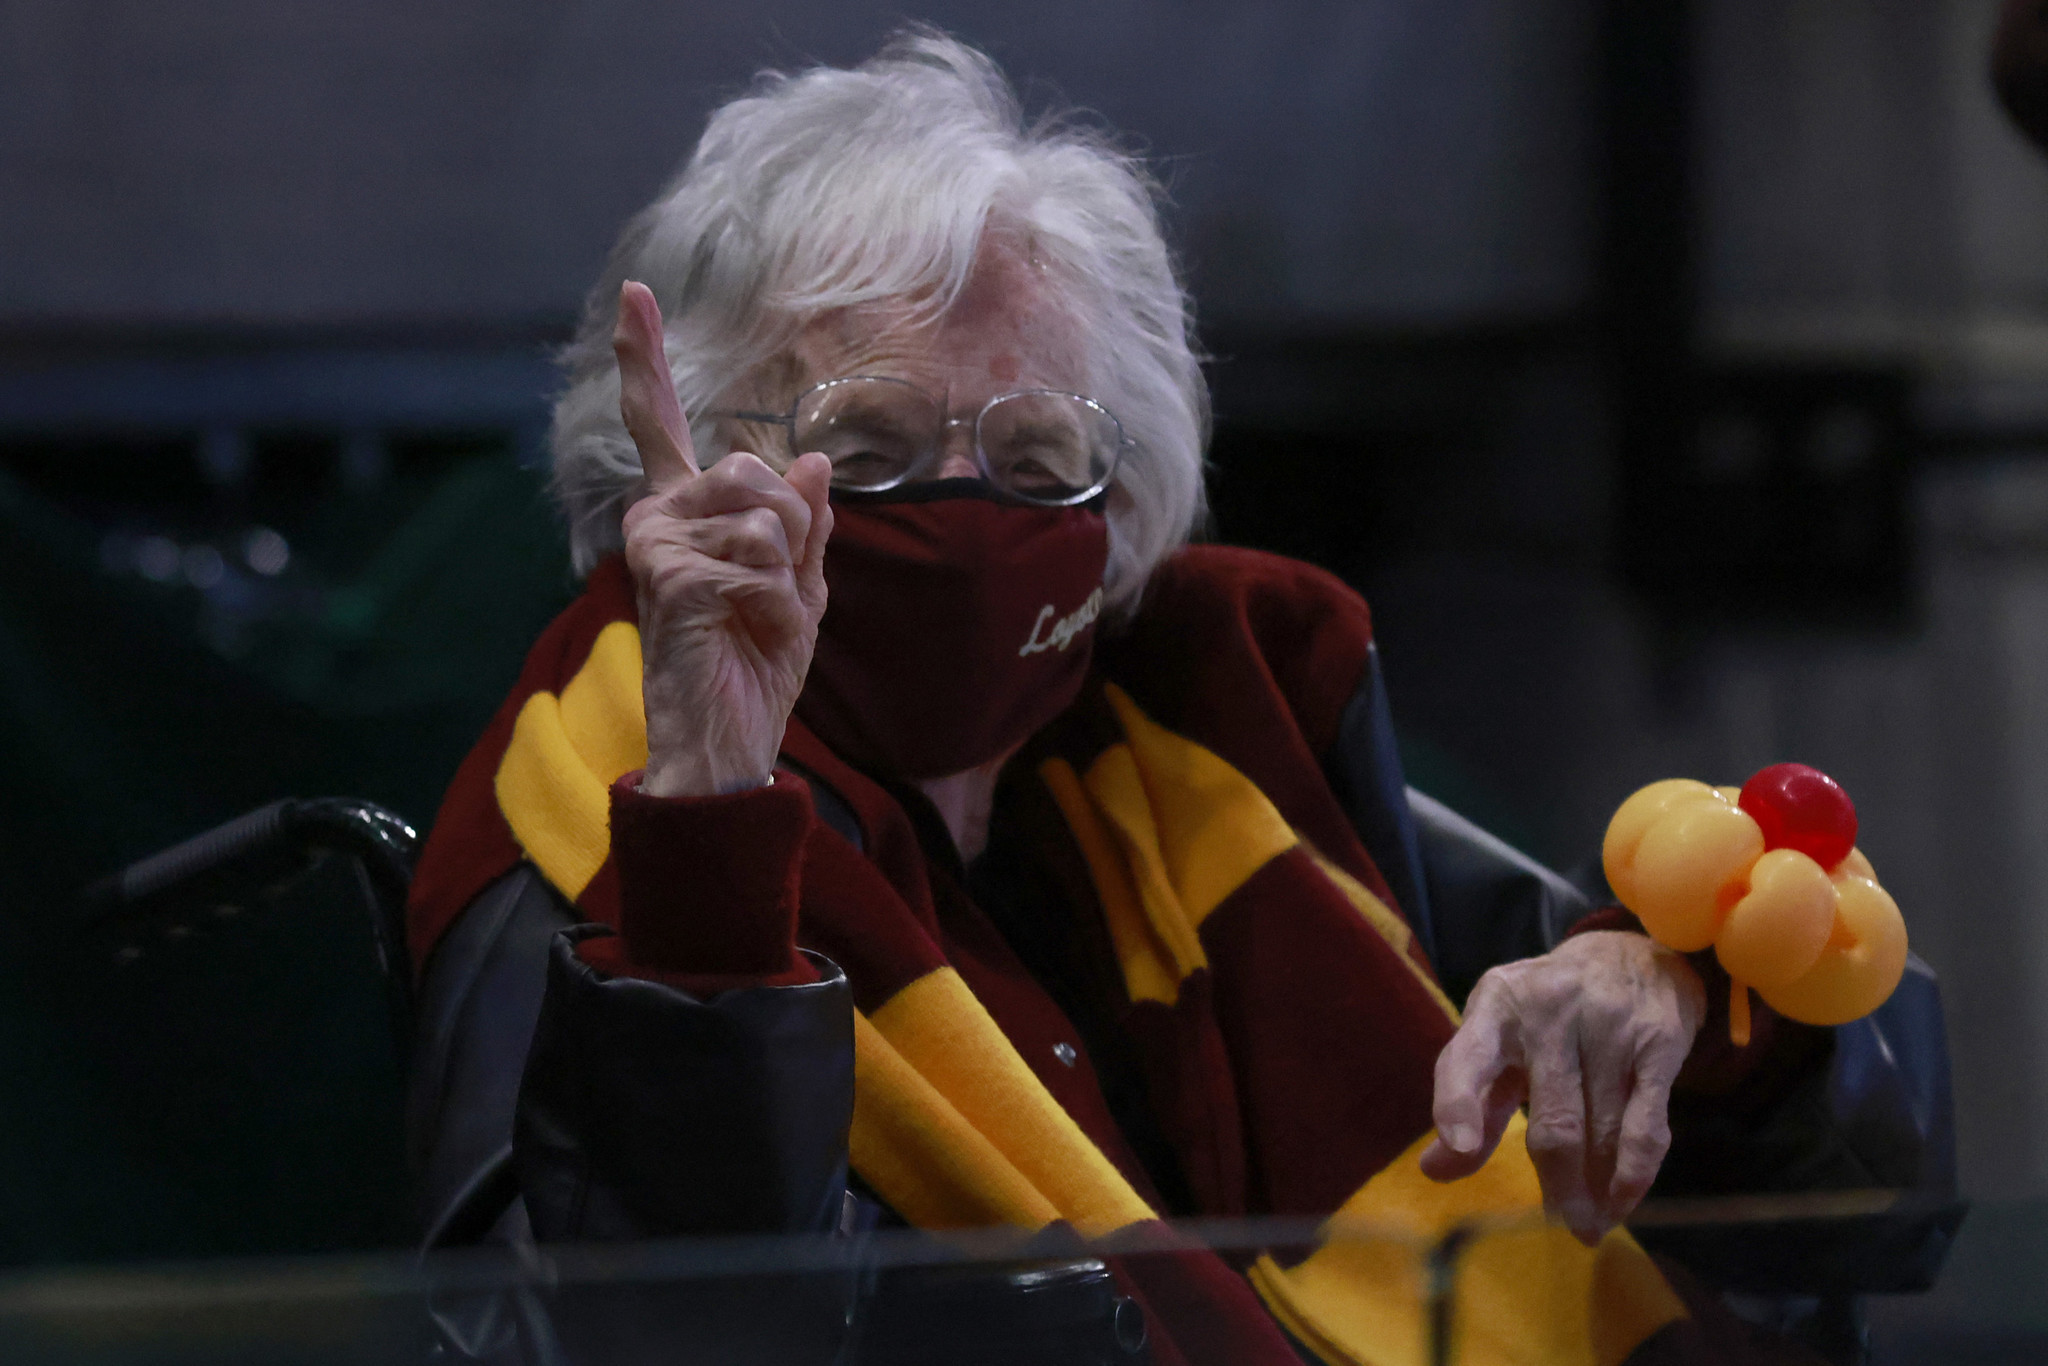 Sister Jean A Fixture At Loyola Basketball Games Turns 100 Today Her Secret To A Long Life I Eat Well And Sleep Well And Hopefully I Pray Well Chicago Tribune